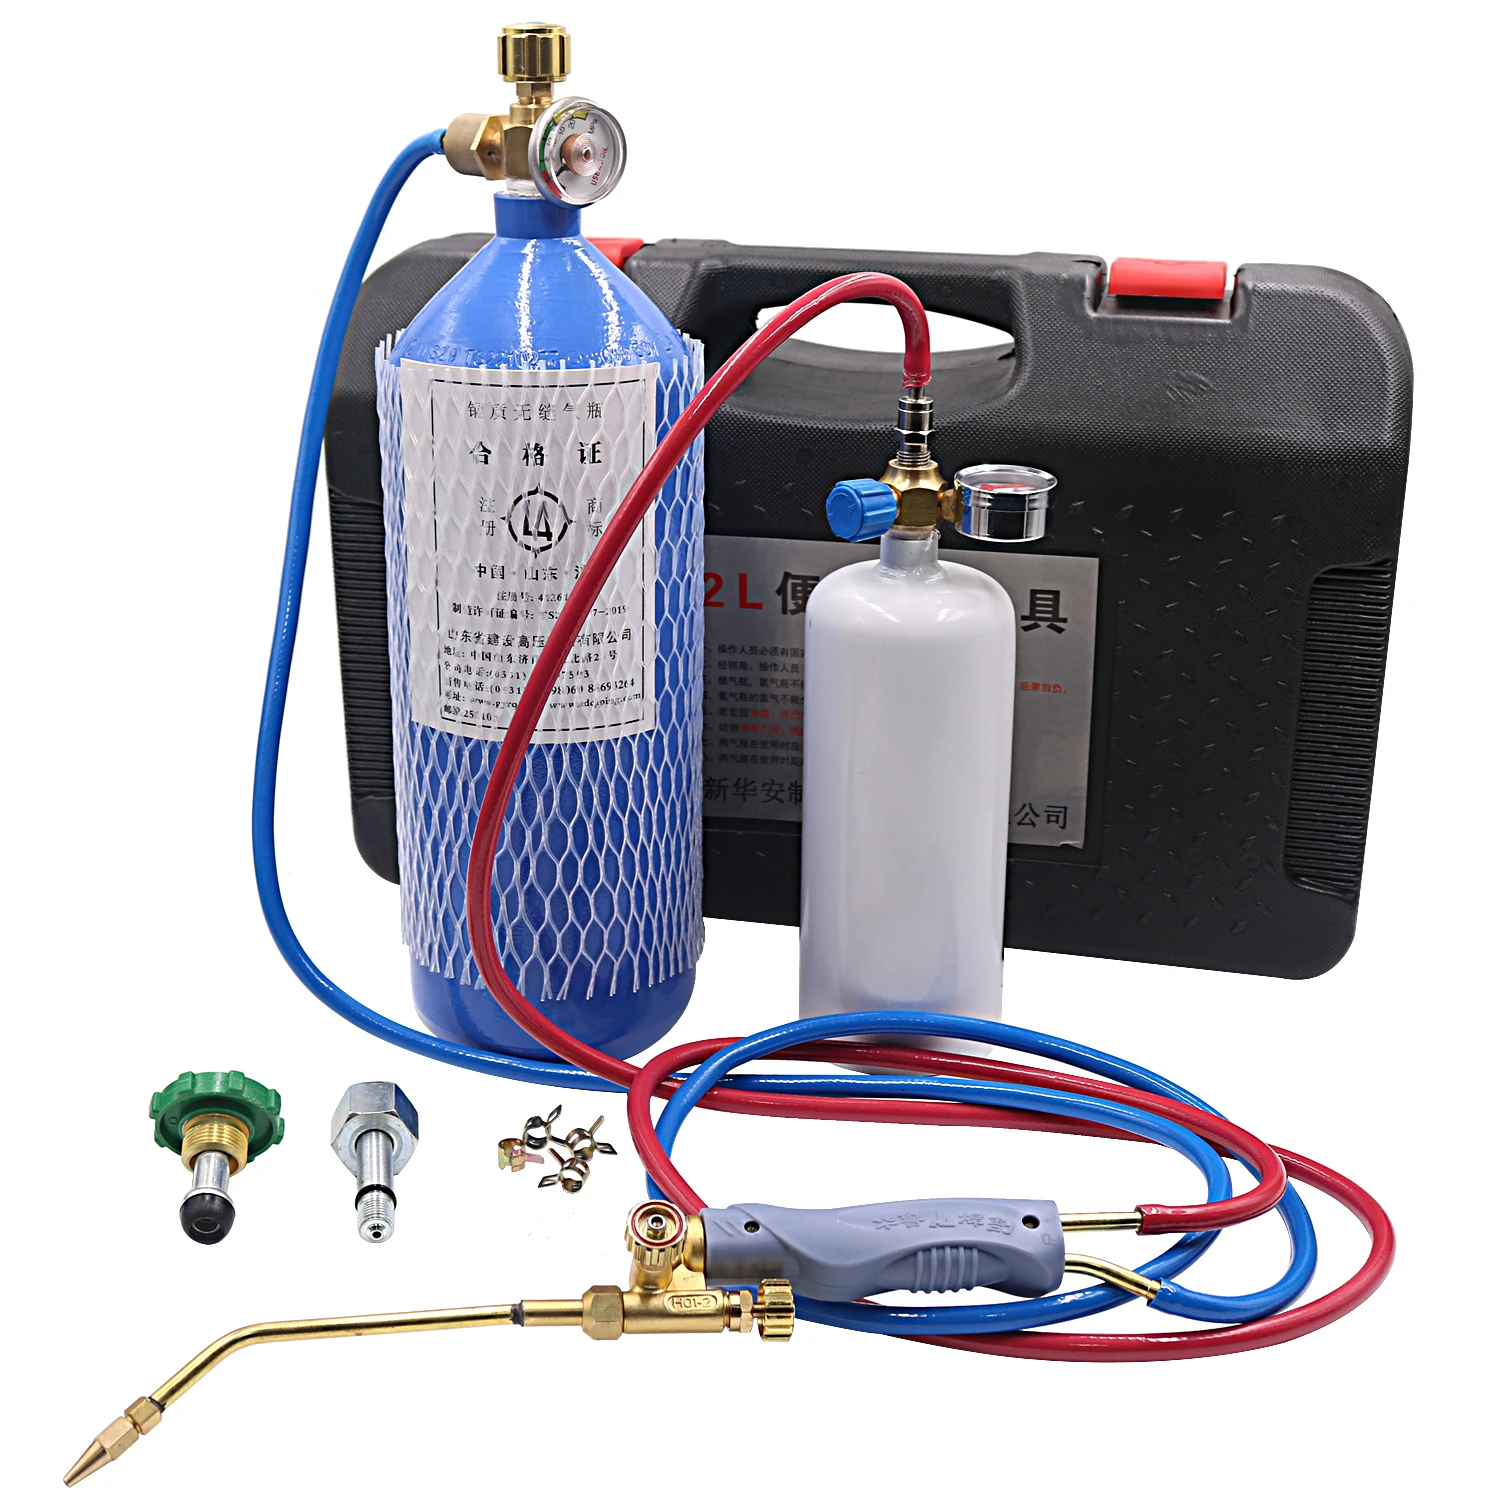 

2L Portable Welding Torch Equipment Set Refrigeration Repair Tool Air Conditioning Copper Tube Oxygen Gas